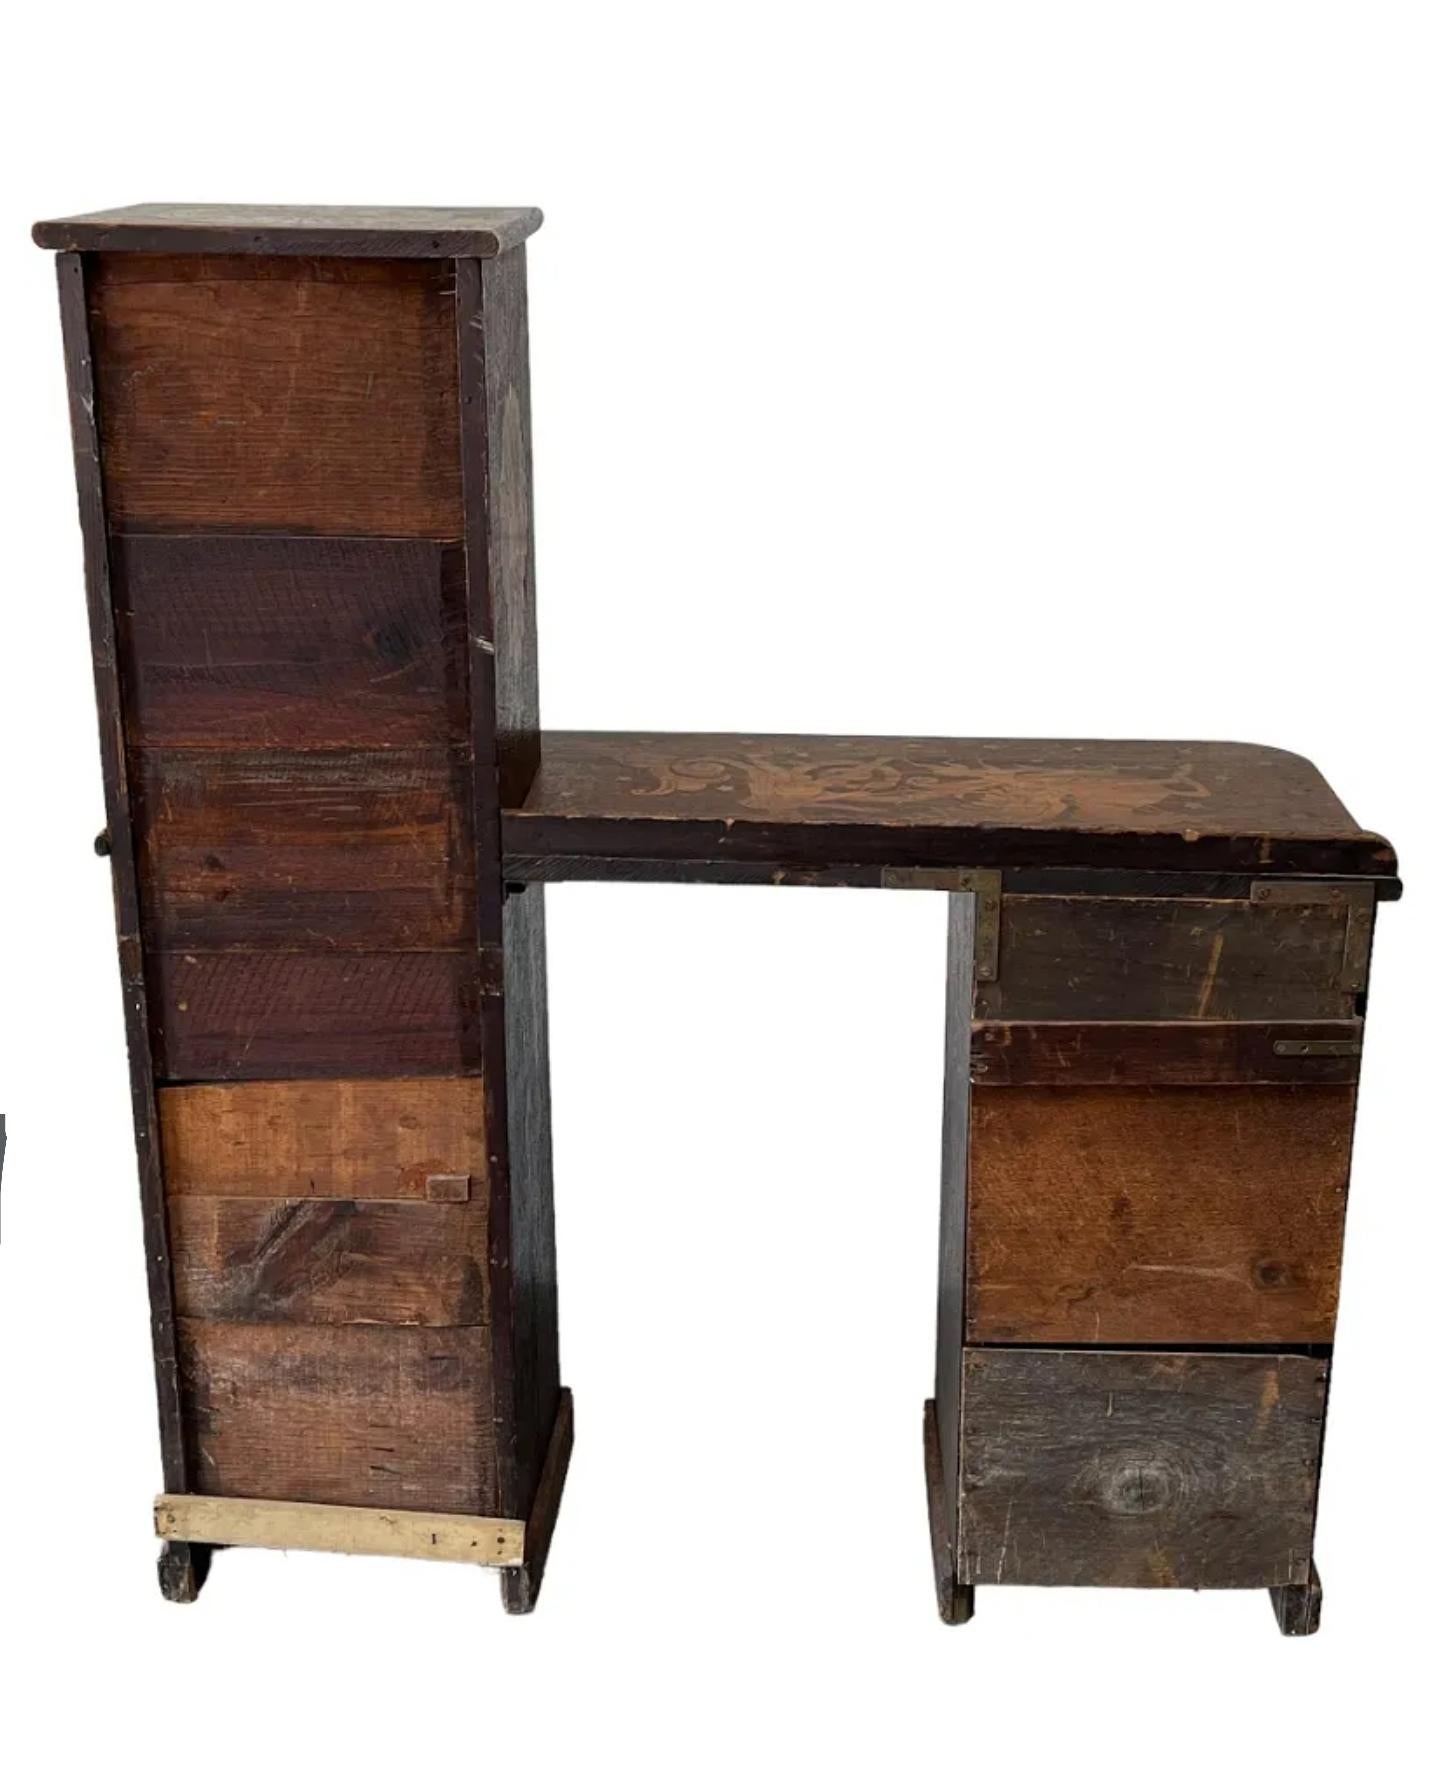 Rare Early American Country Pyrography Desk For Sale 8